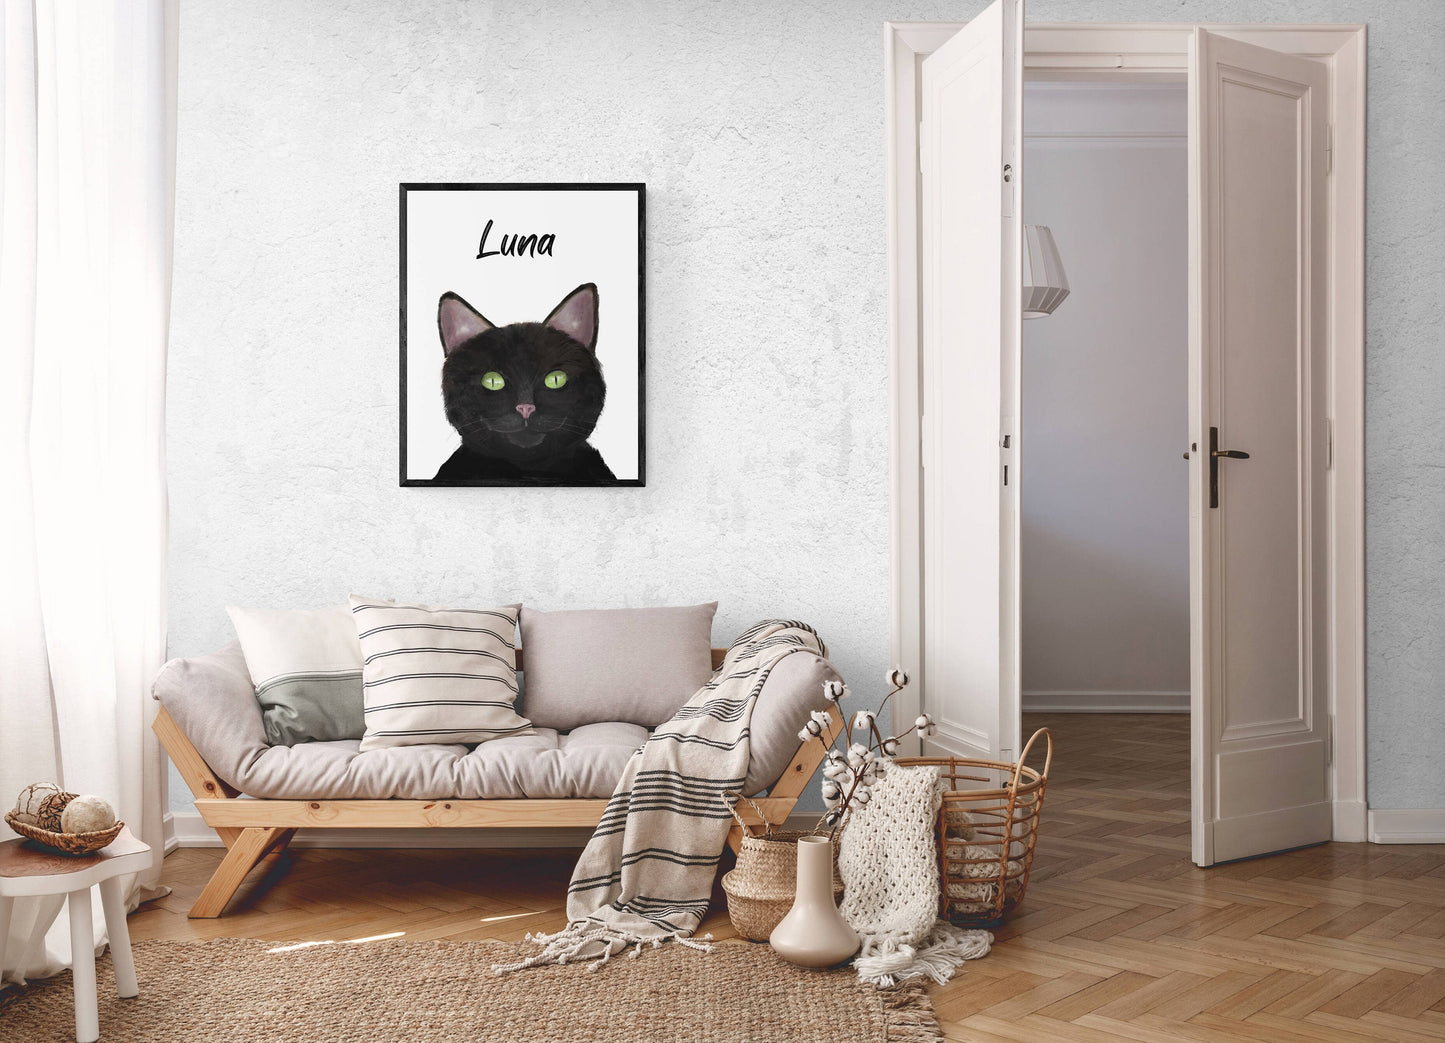 Customized Black Cat Portrait, Personalized Cat Name Print, Pet Painting, Black Cat With Green Eyes, Animal Memorial, Cat Lover Gift